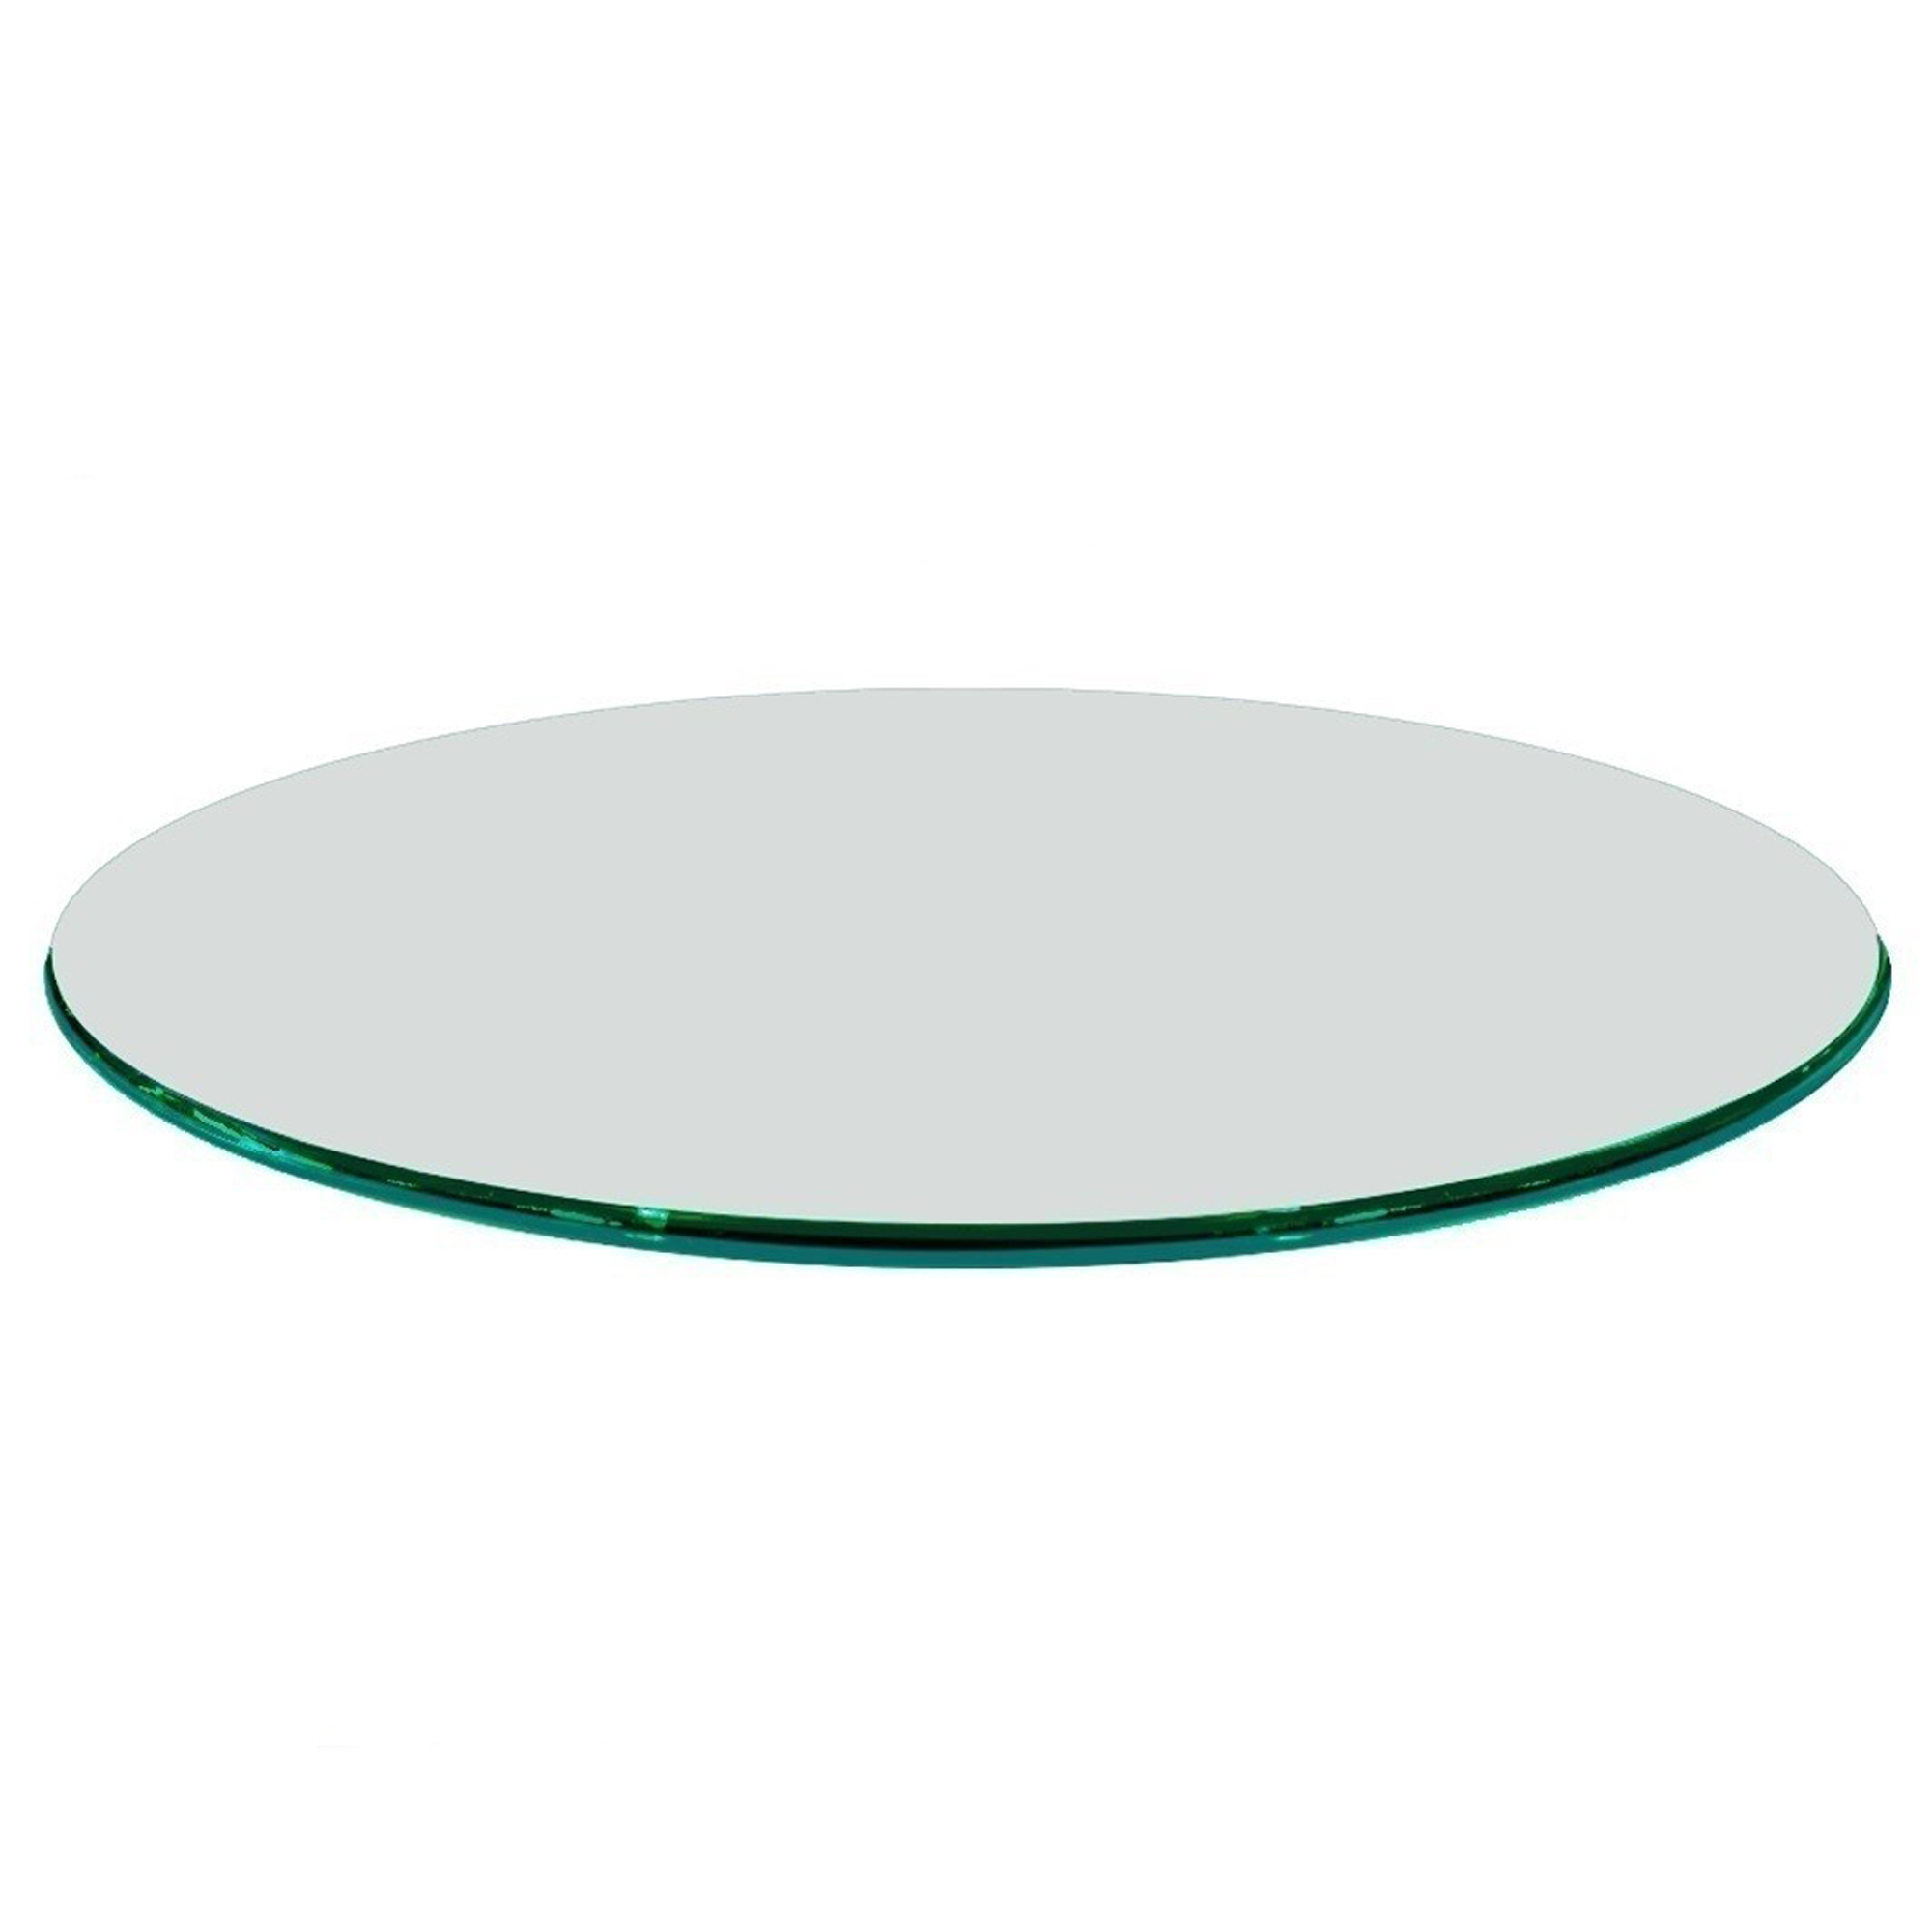 Round Glass Dining Table Tops, Circular Glass Table Protector